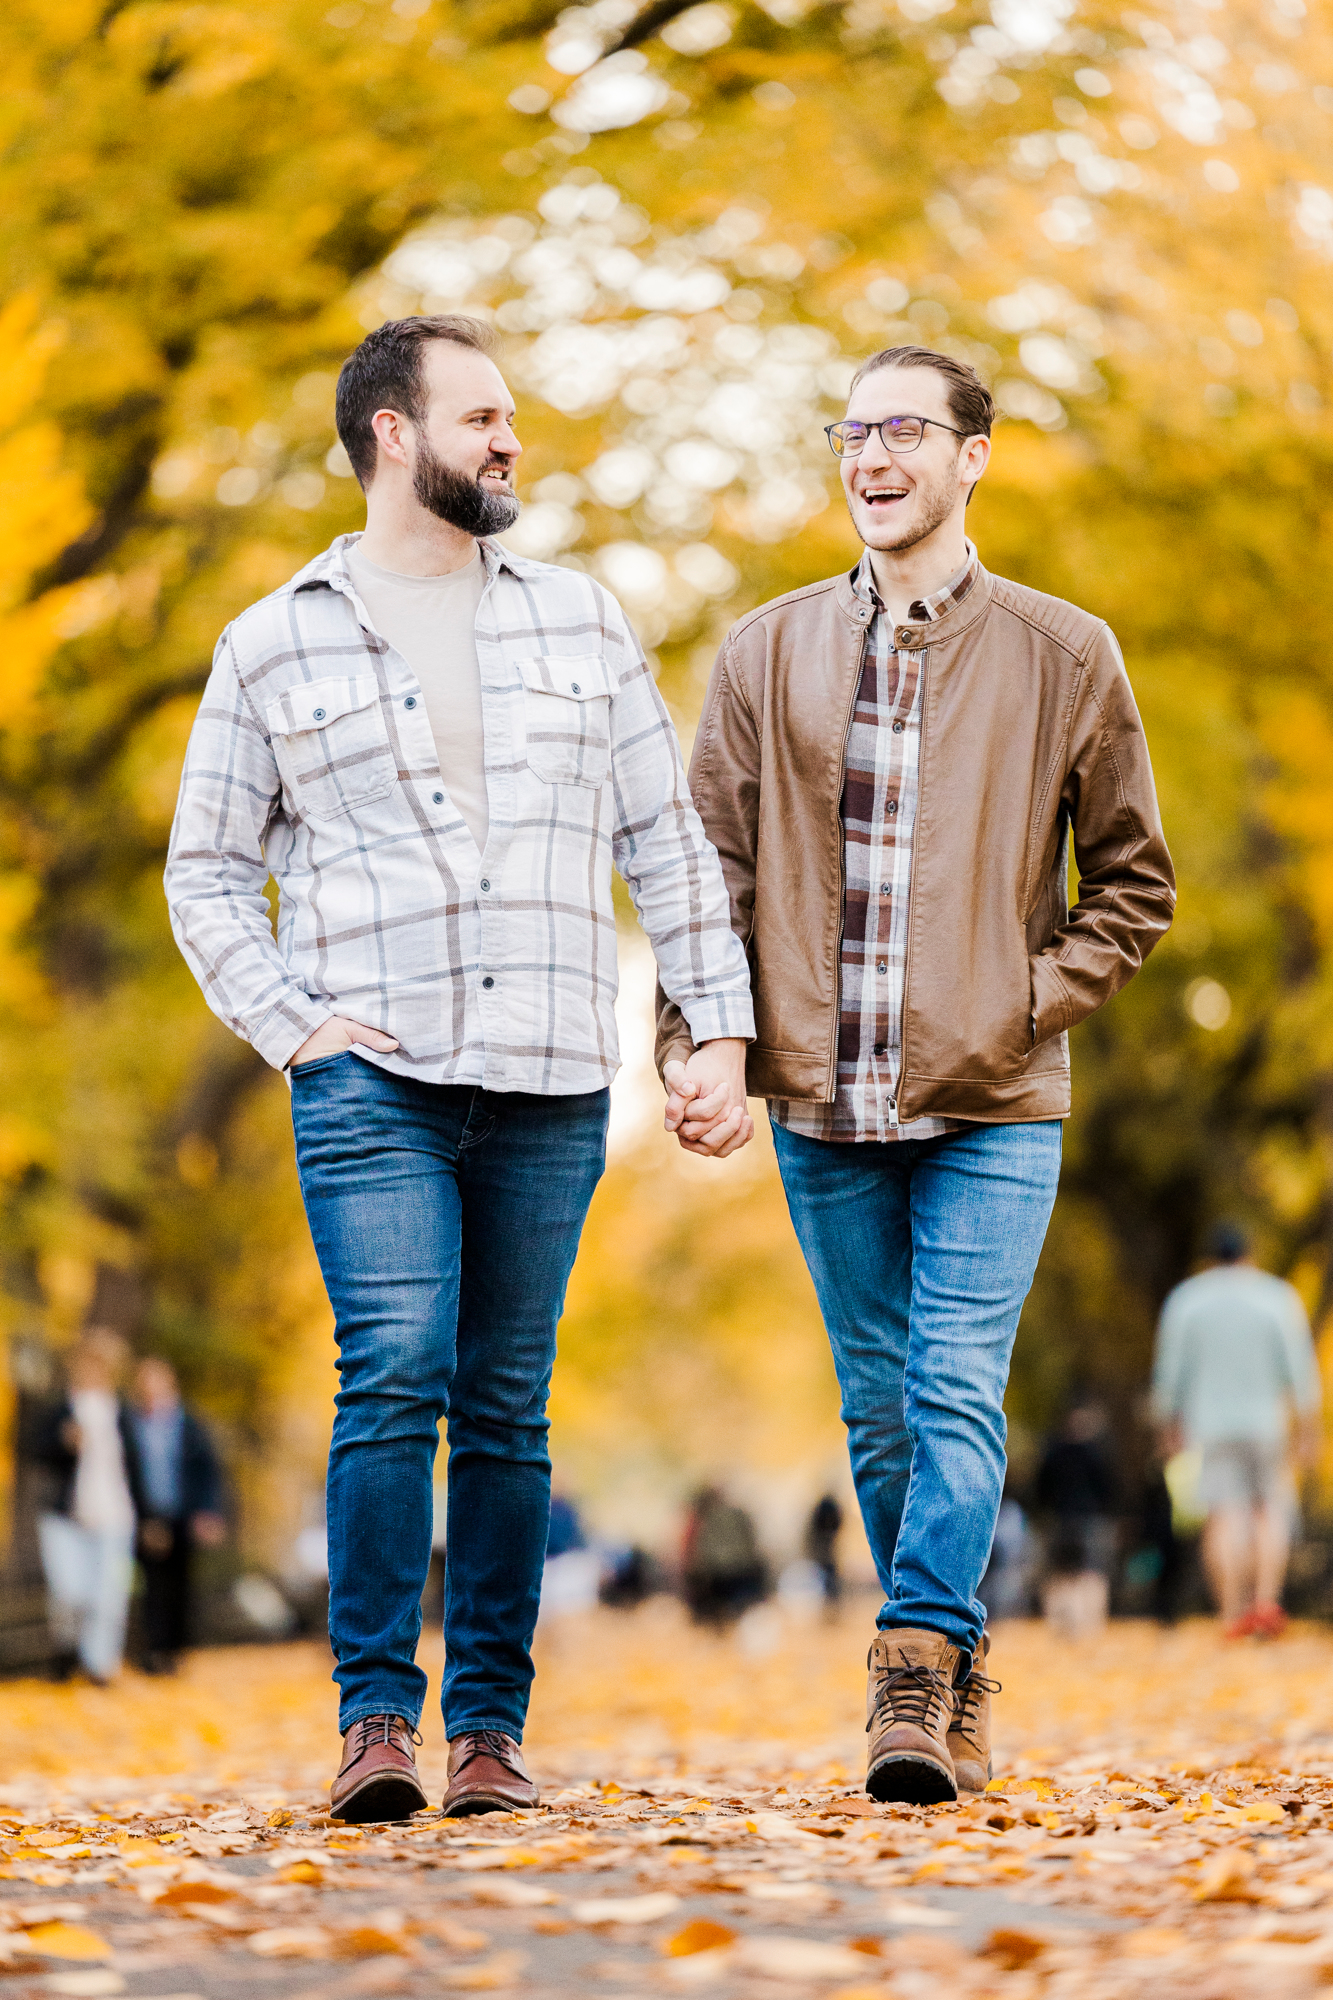 LGBTQ+ Engagement Photo Shoot in Central Park